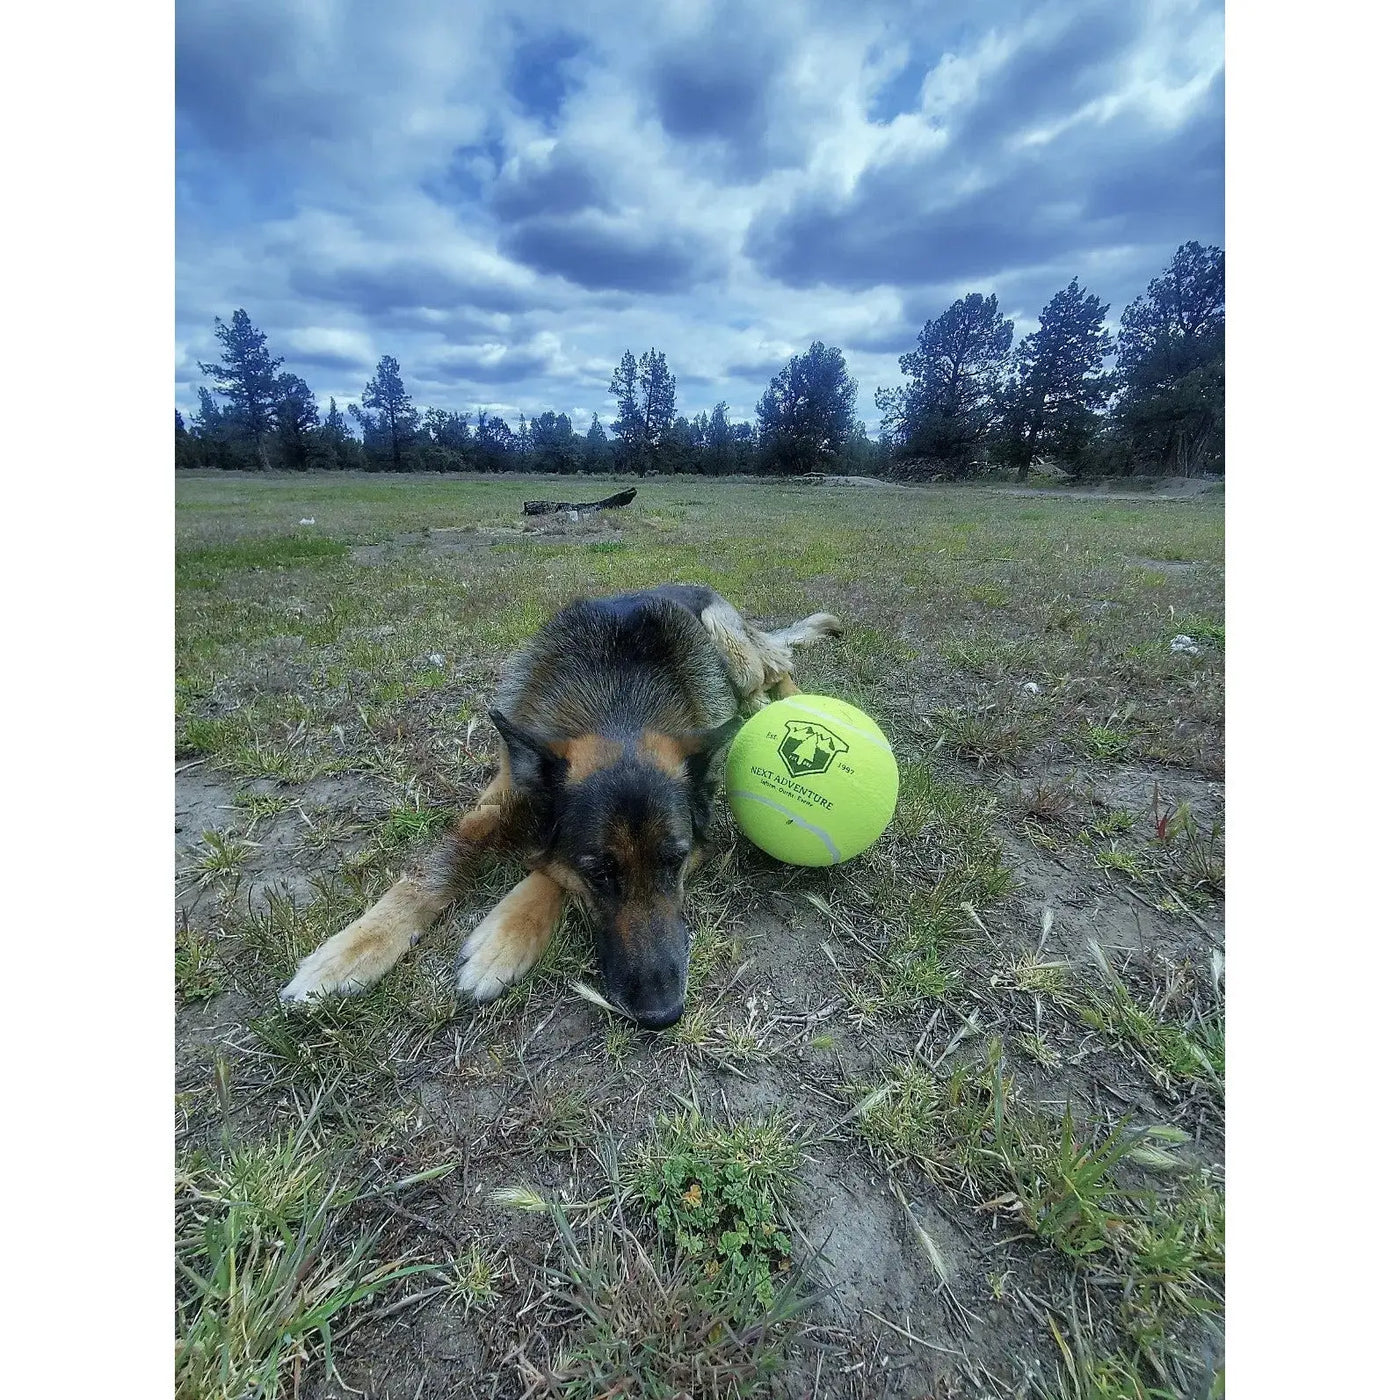 #dog, 8, 9.5, adventure, ball, balllarge, balls, best, brand, chewing, crazy, dogs, free, free shipping, from, Germanshephard, green, hand, happypetssupply, happypetssupplycomlarge, happypetssupplylarge, inch, large, love, material, meta, name, next, over, Pet, Pets, pooch, price, puppy, quality, rubber, save, shipping, shippinglarge, supplies, tennis, that, todaylarge, toys, type, will